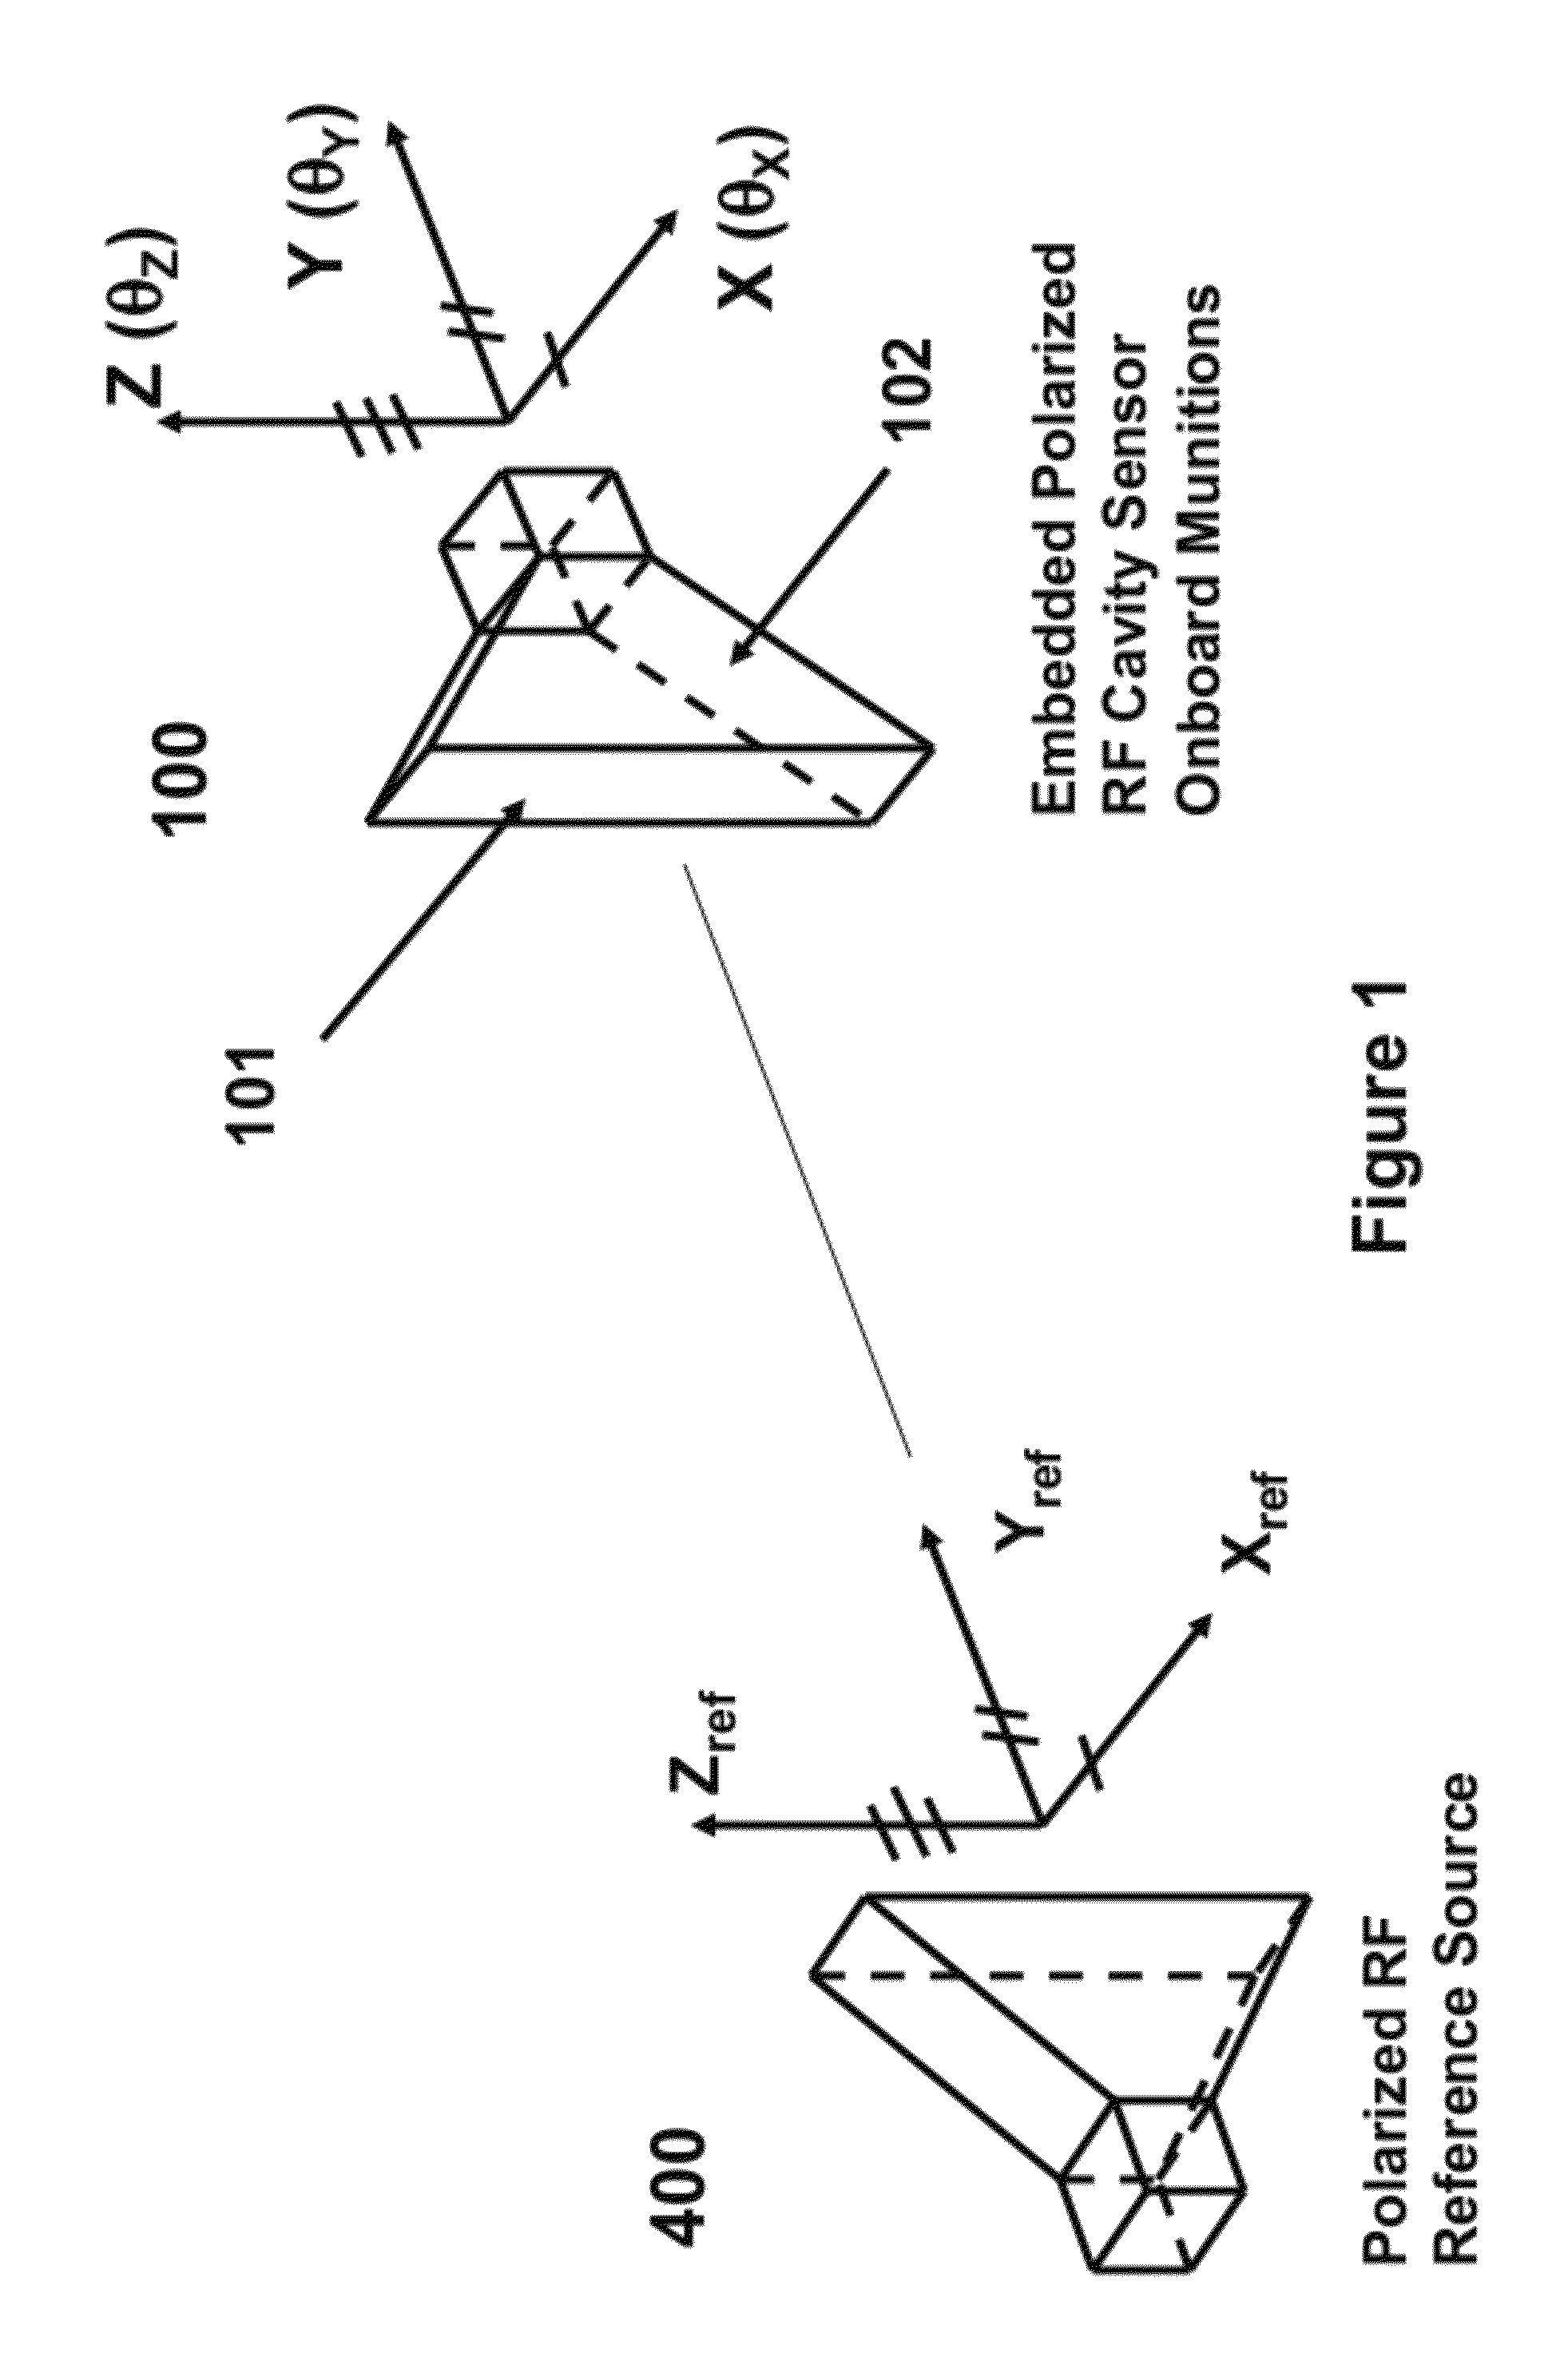 System and method for roll angle indication and measurement in flying objects